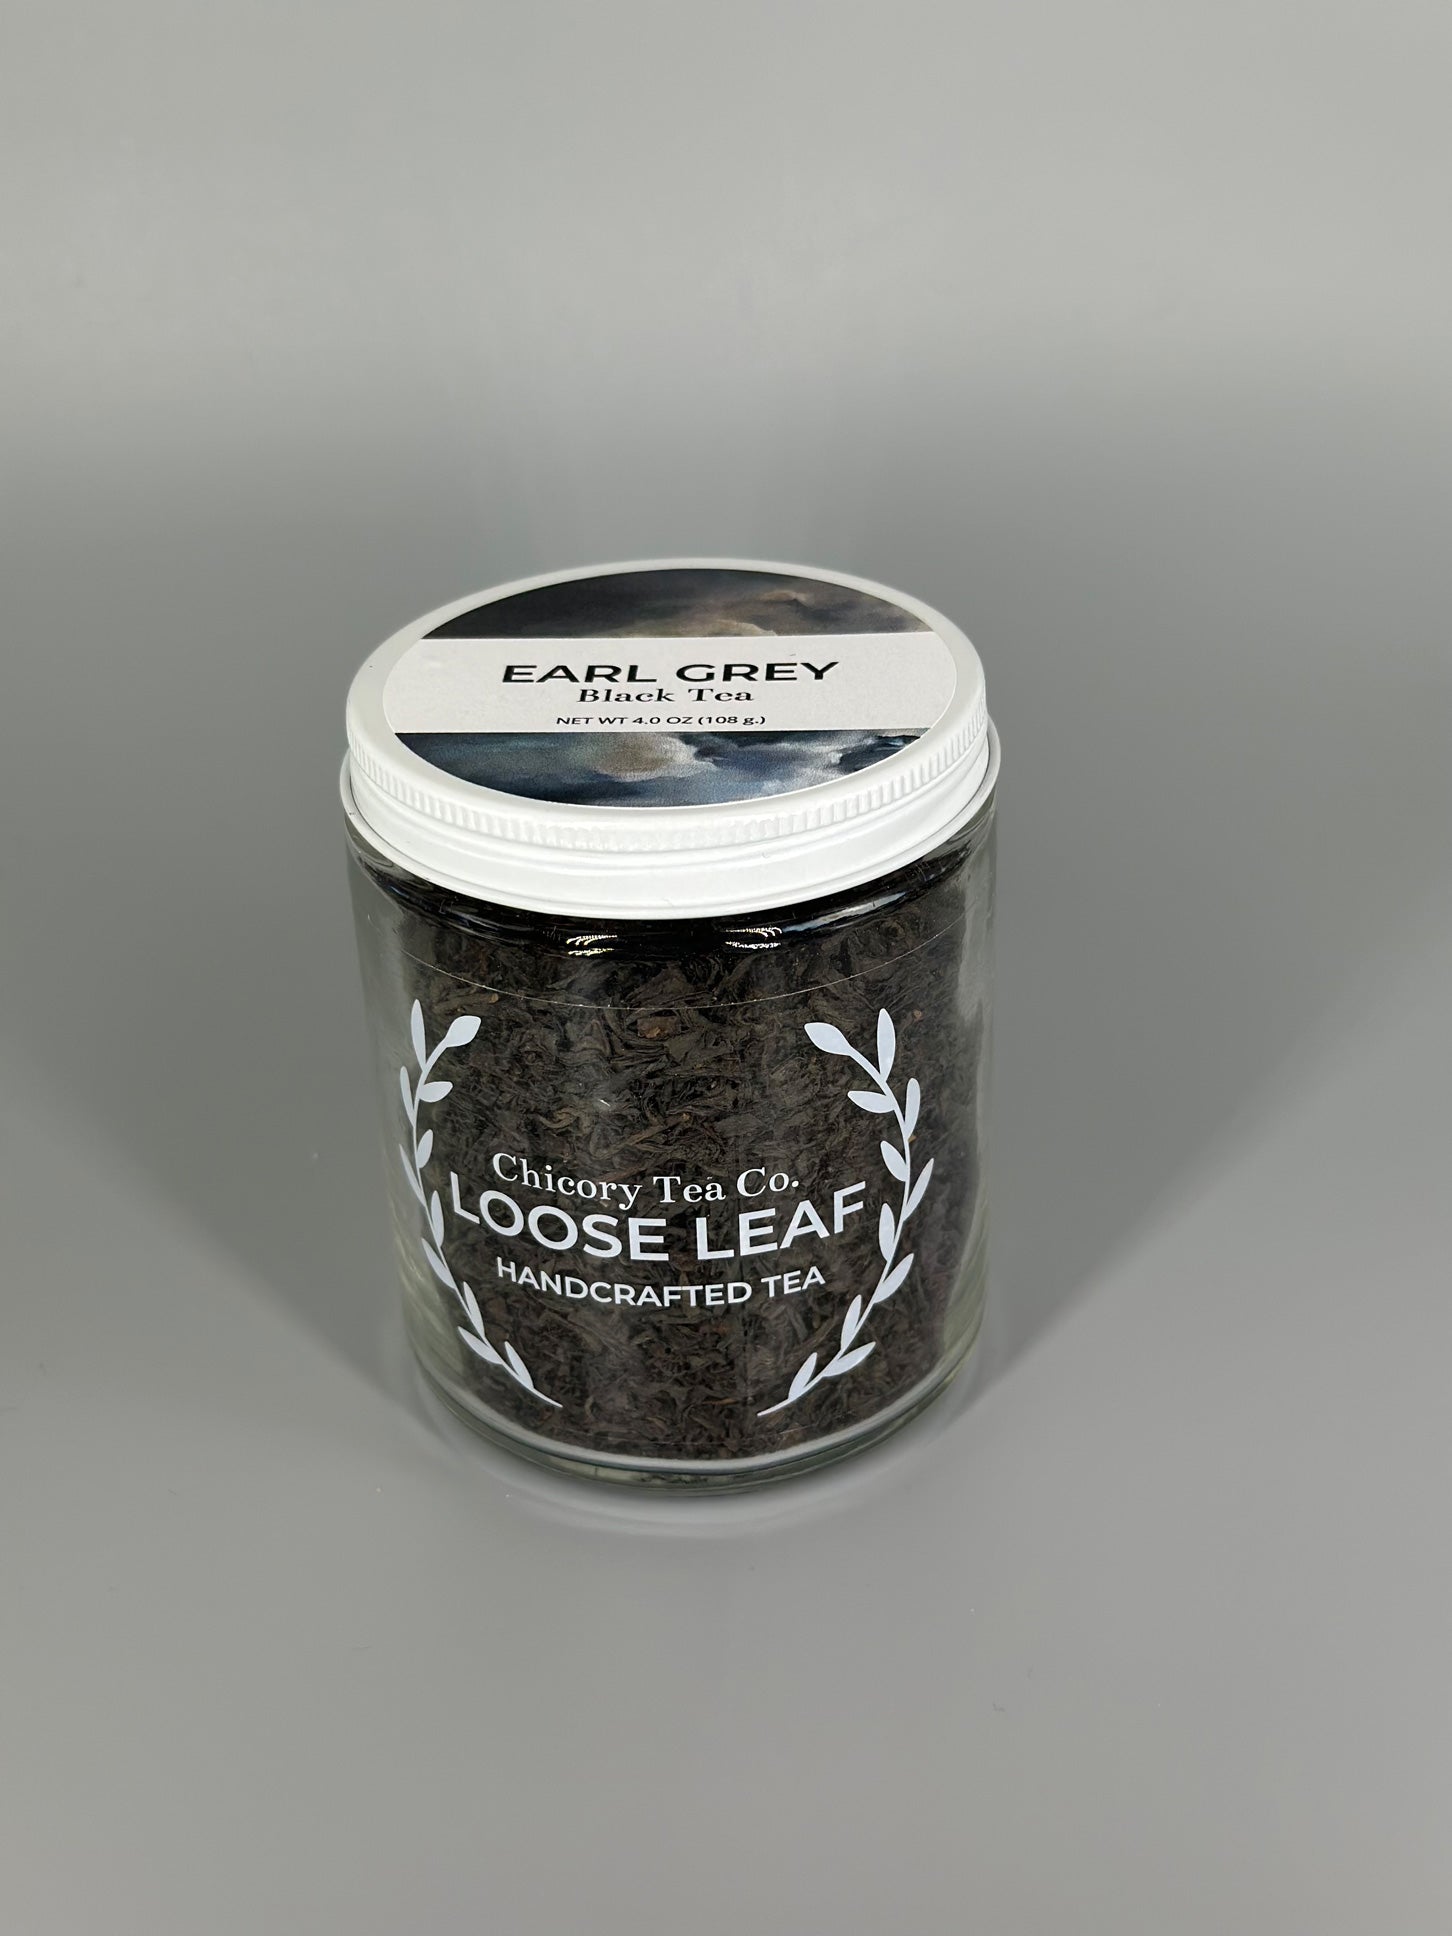 Chicory Tea Co.'s Earl Grey Black Tea in the jar, view from front